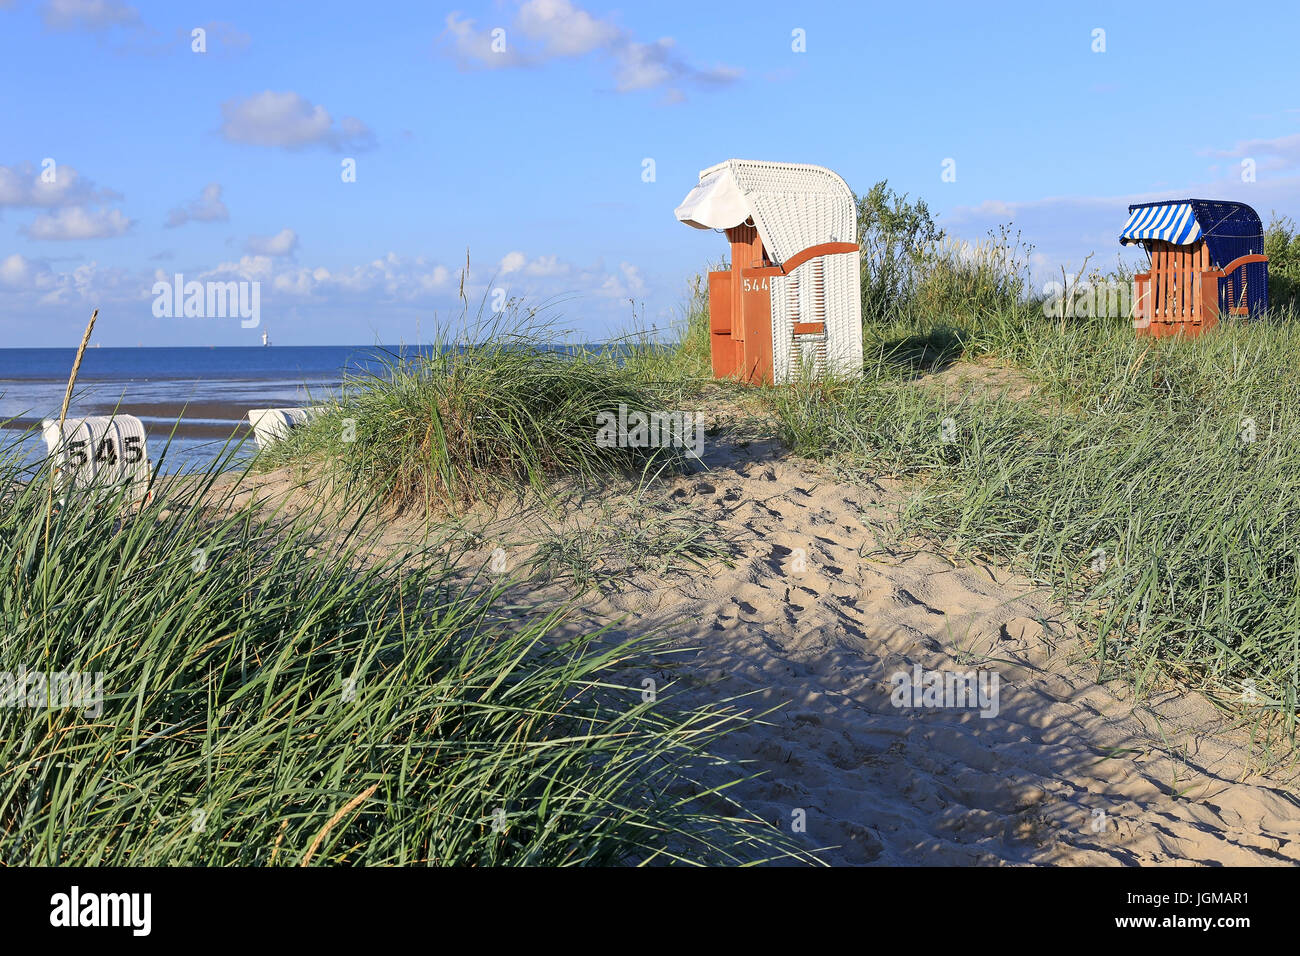 Europe, the Federal Republic of Germany, Hooksiel, Wangerland, Friesland, the North Sea, North Sea coast, years, vacation, beach vacation, water, beac Stock Photo